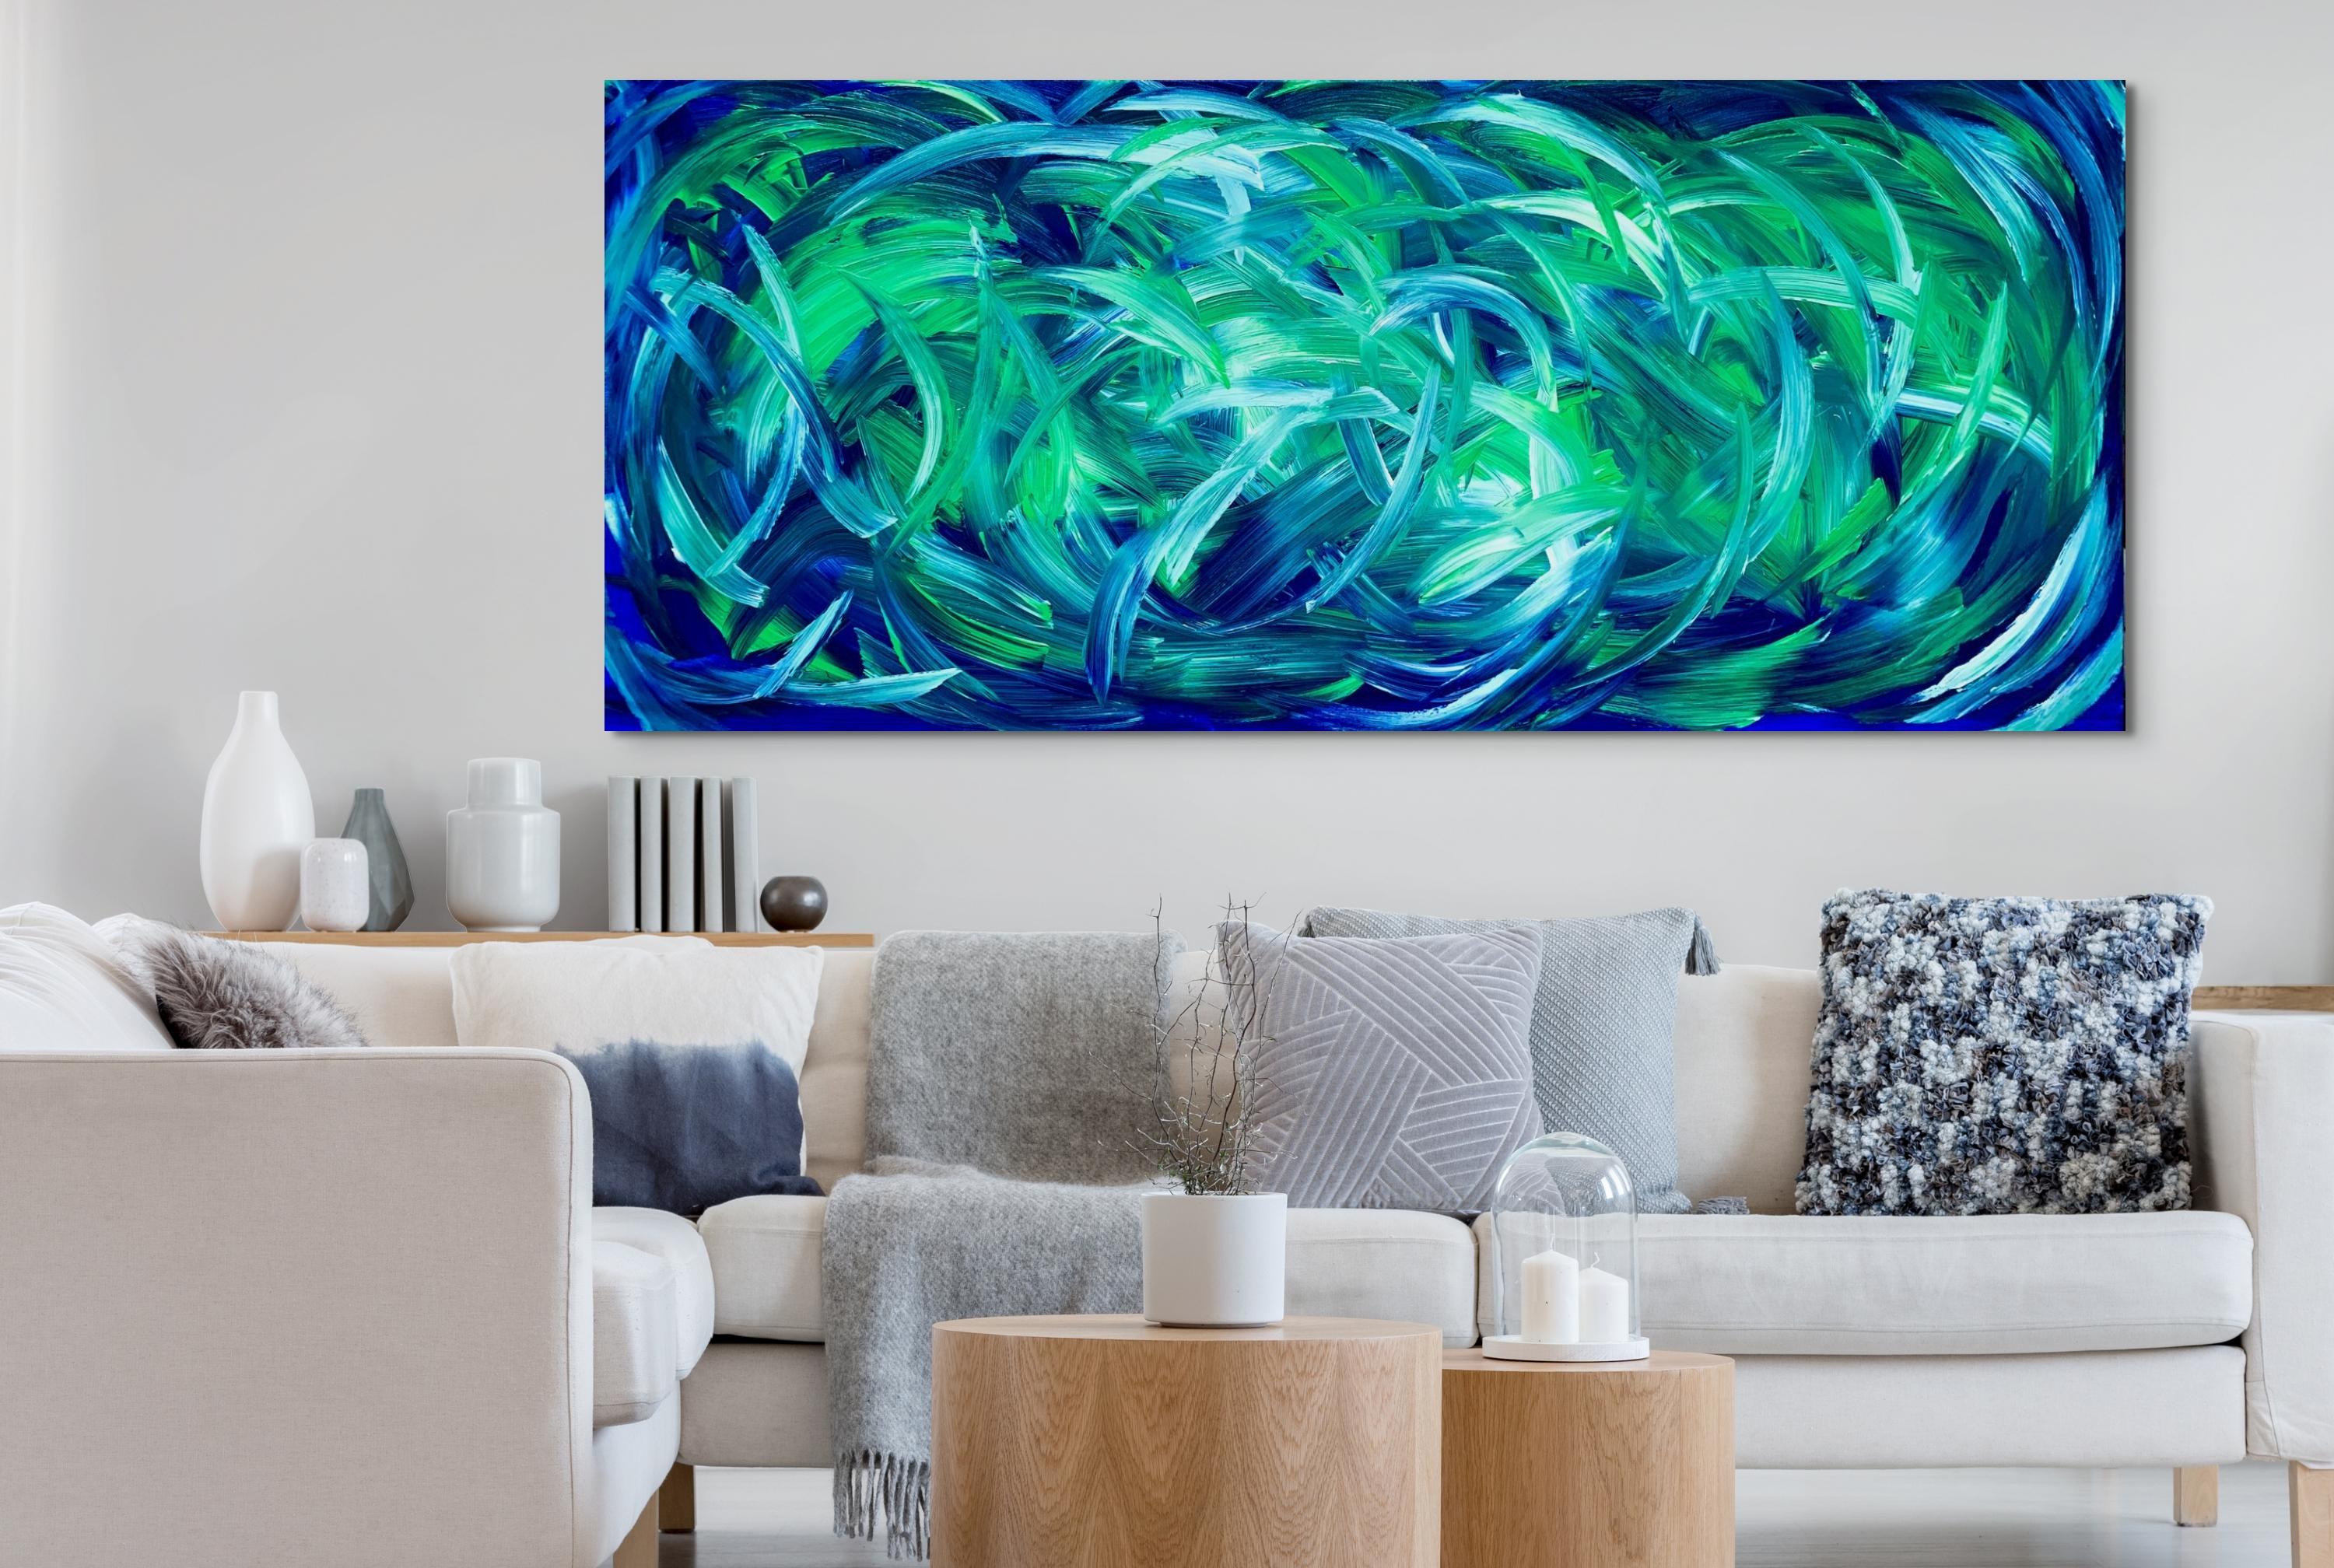 Reef Harmony - Abstract Expressionist Painting by Estelle Asmodelle